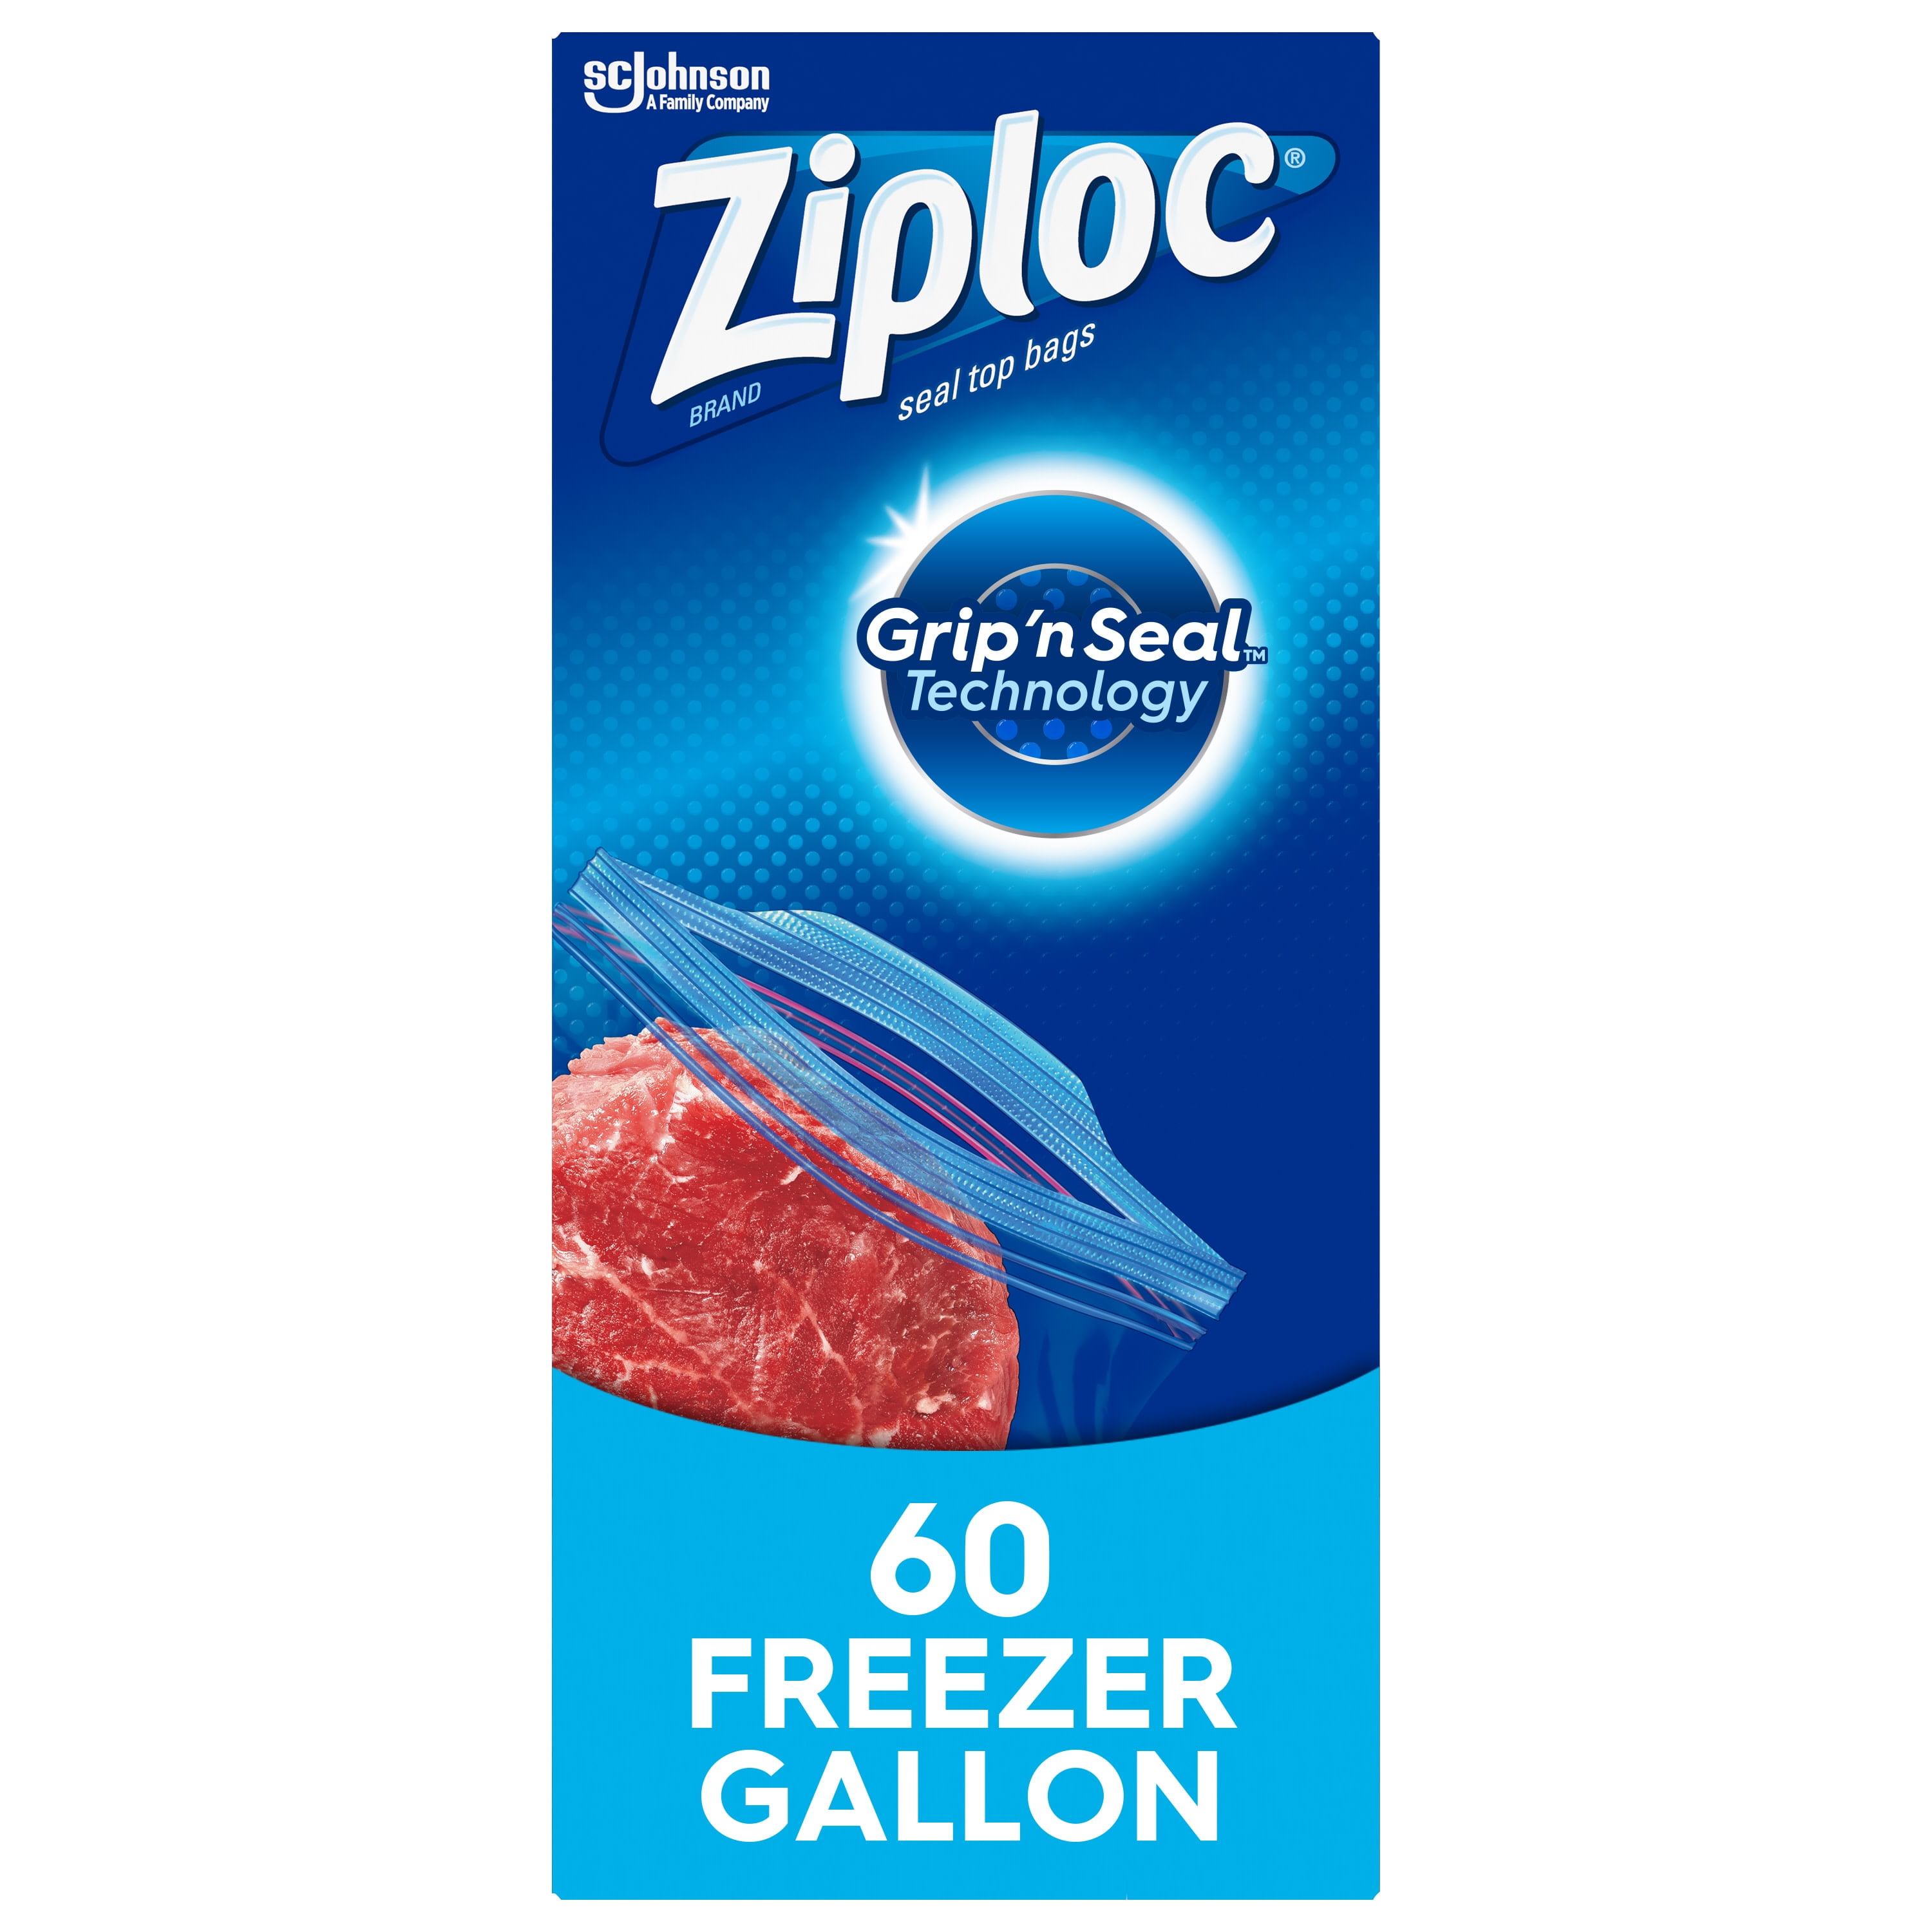 Ziploc® Brand Freezer Bags with Grip 'n Seal Technology, Gallon, 60 Count